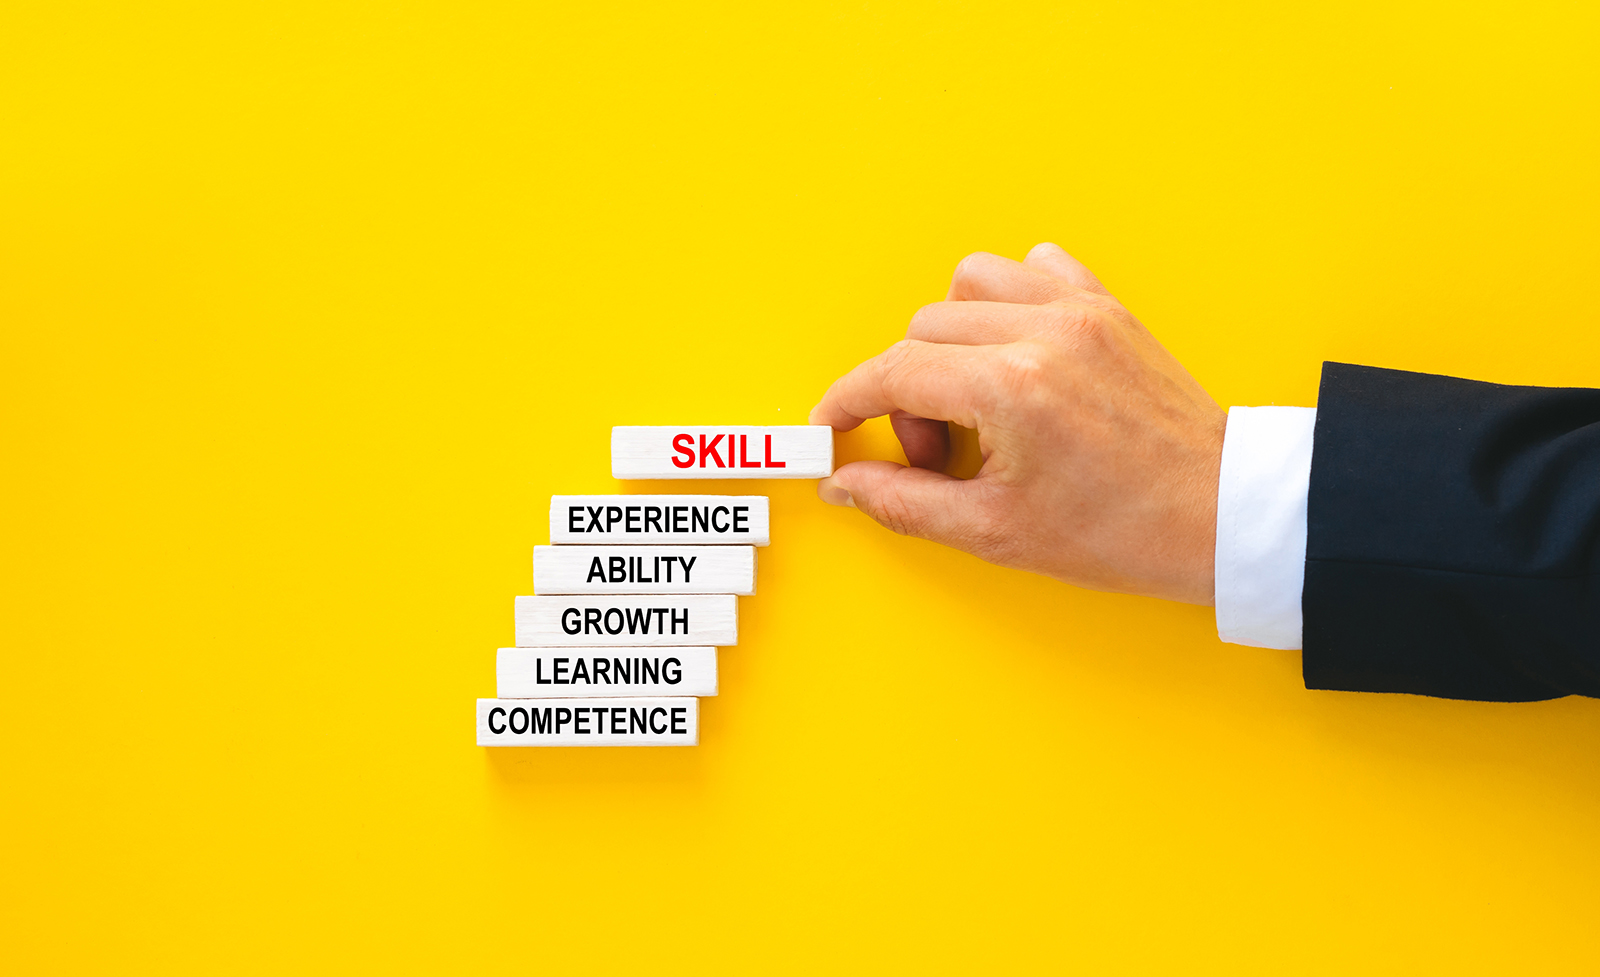 What are the 10 most essential skills for the workplace?